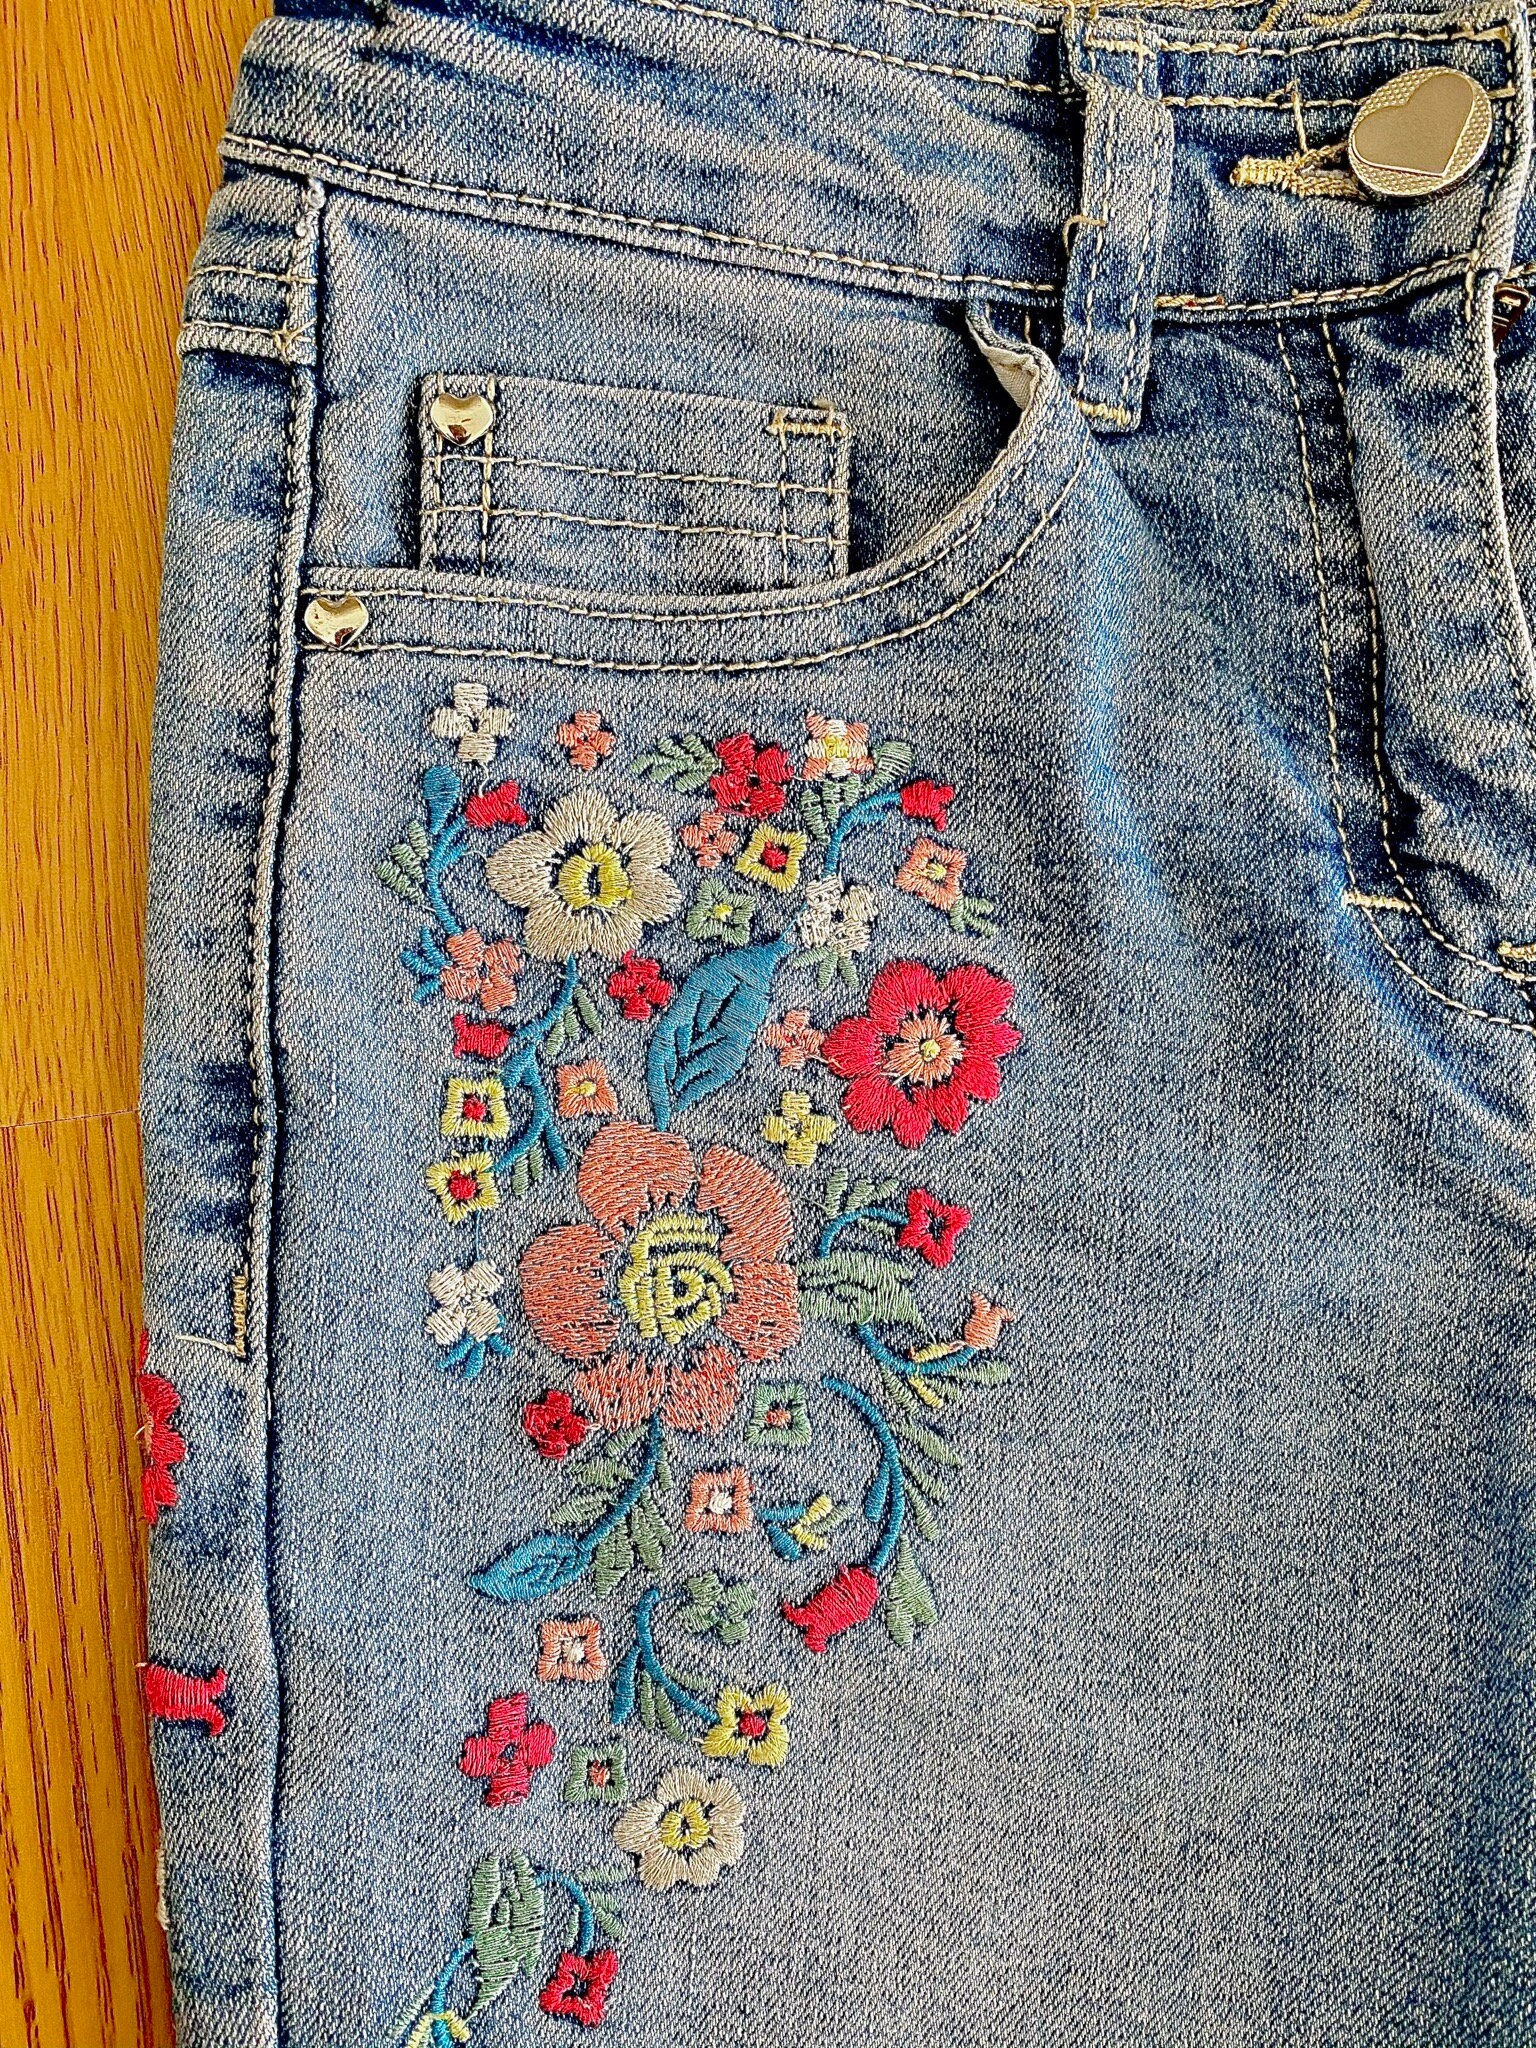 Embroidery jeans | Etsy